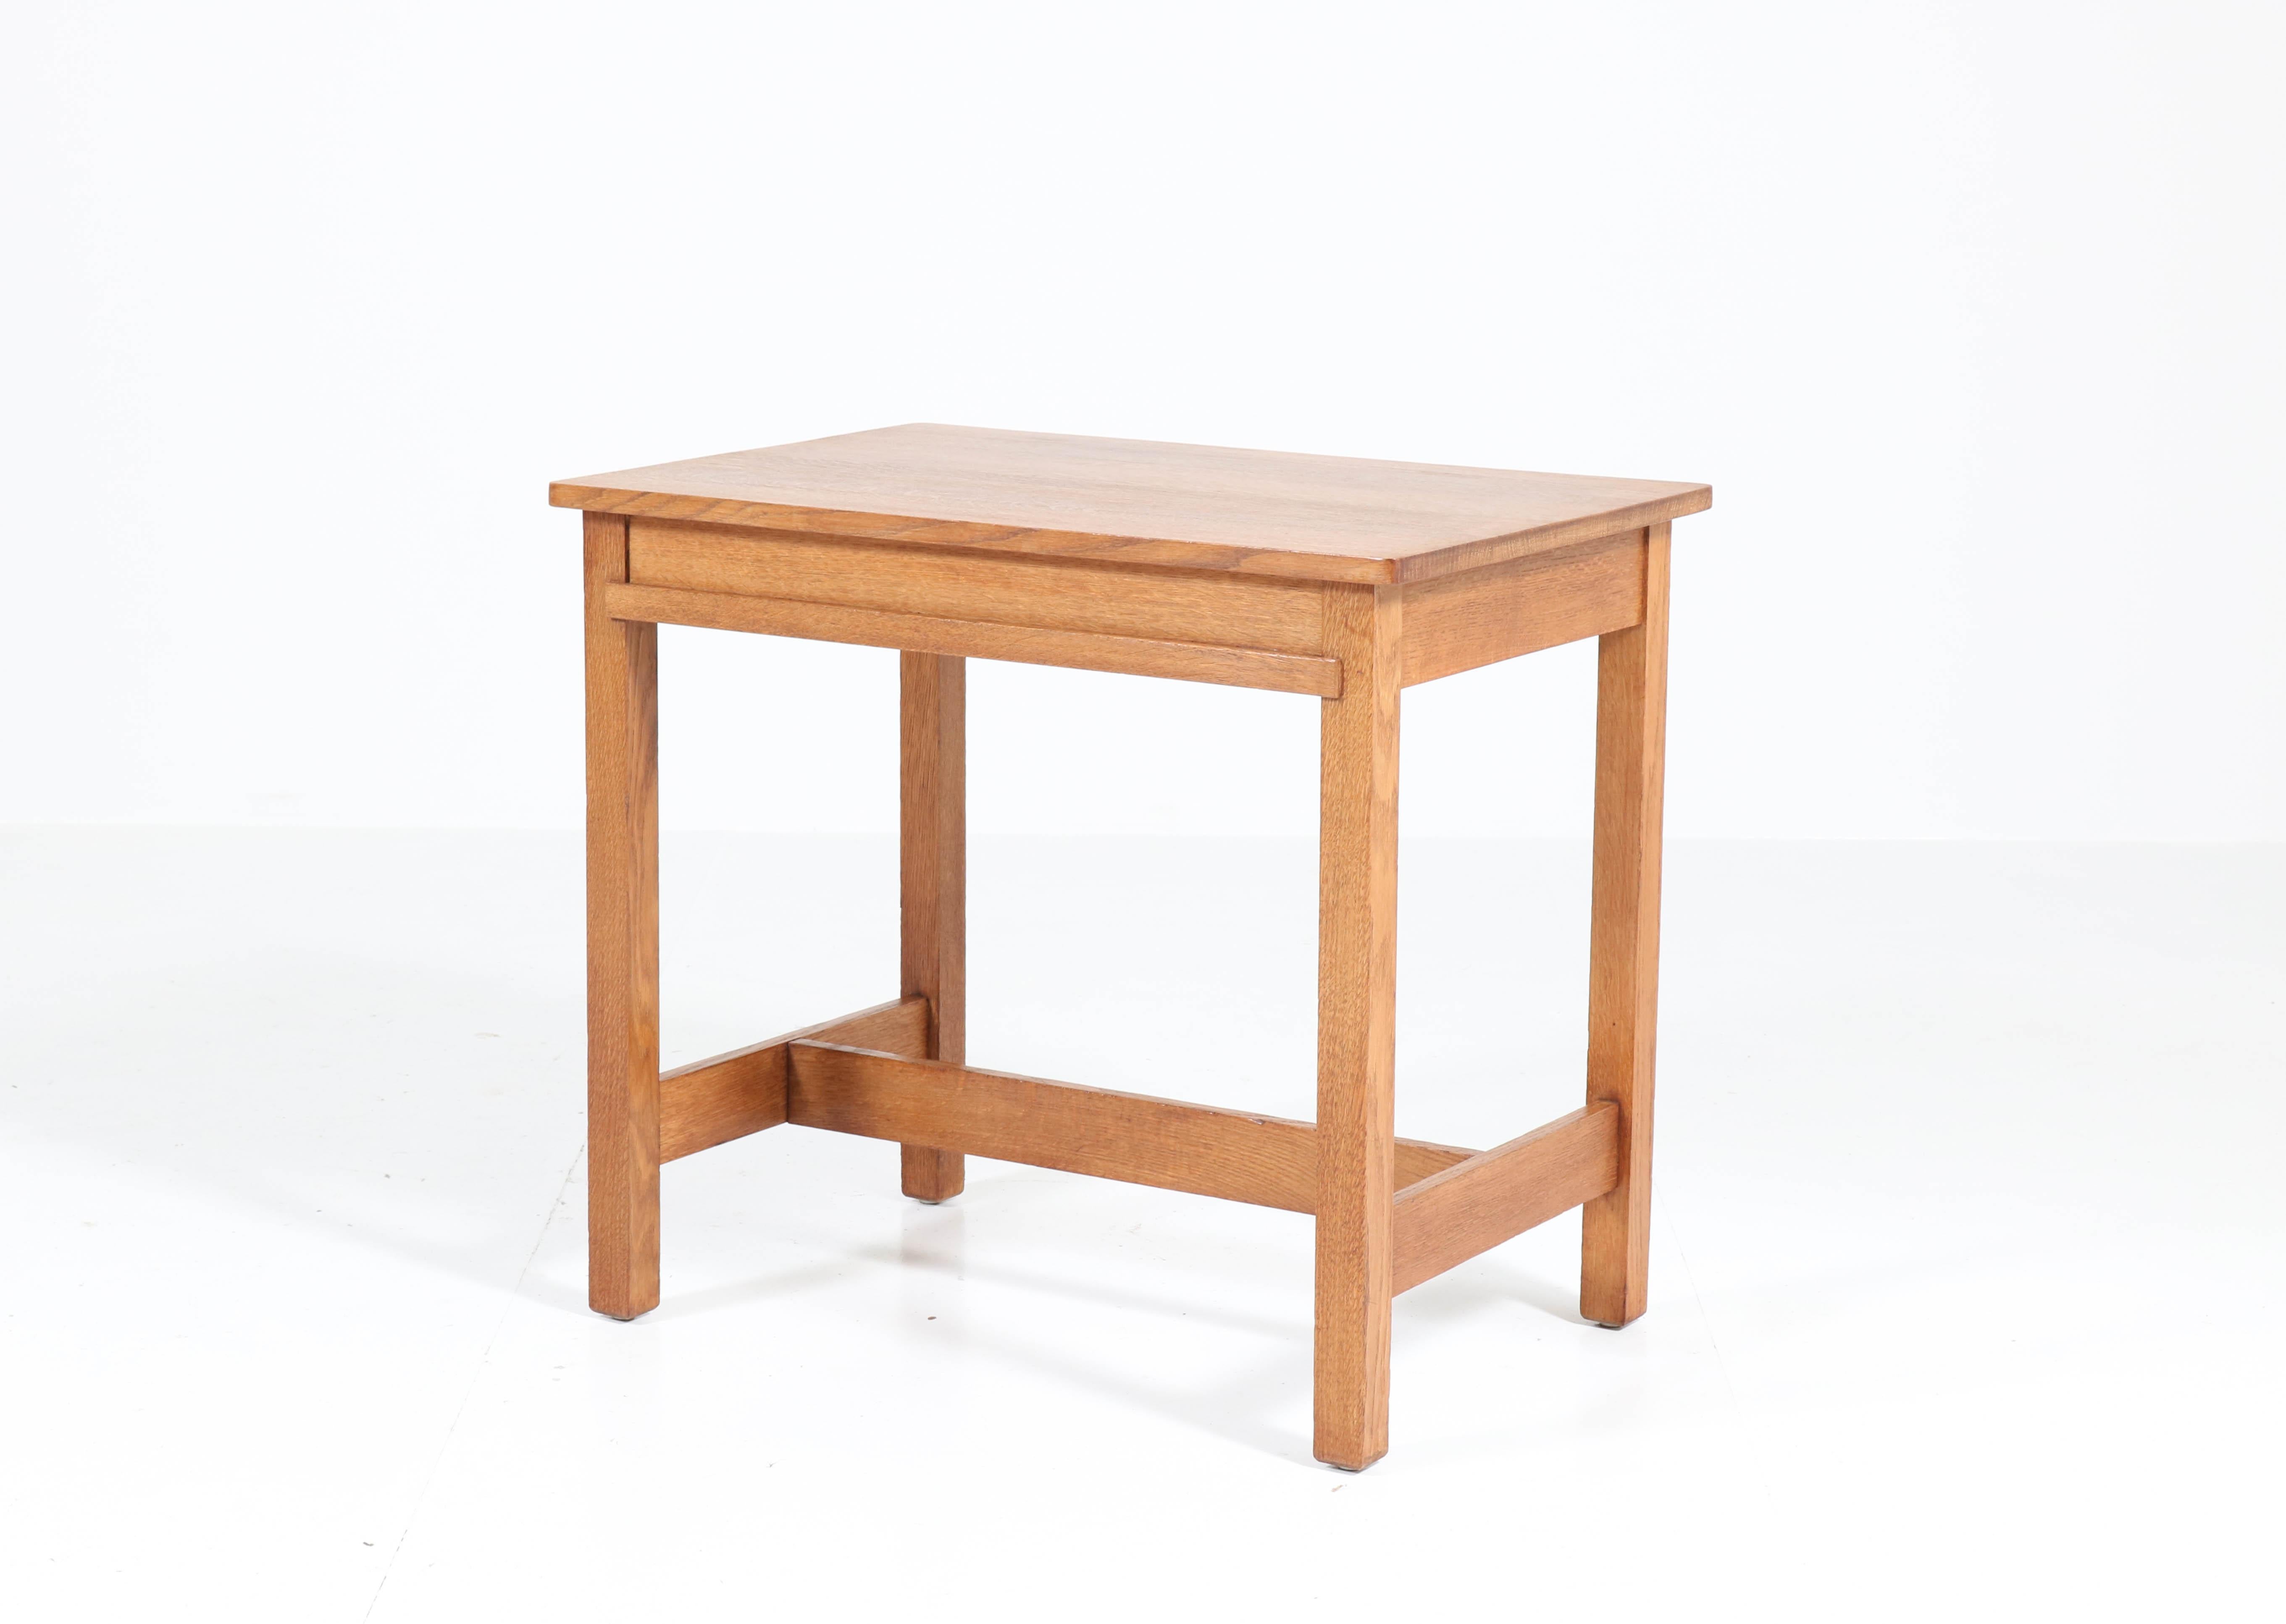 Wonderful and rare Art Deco Haagse School writing table.
Design by Hendrik Wouda for H. Pander & Zonen.
Striking Dutch design from the 1920s.
Solid oak with metal tag Pander, see last image.
In good original condition with minor wear consistent